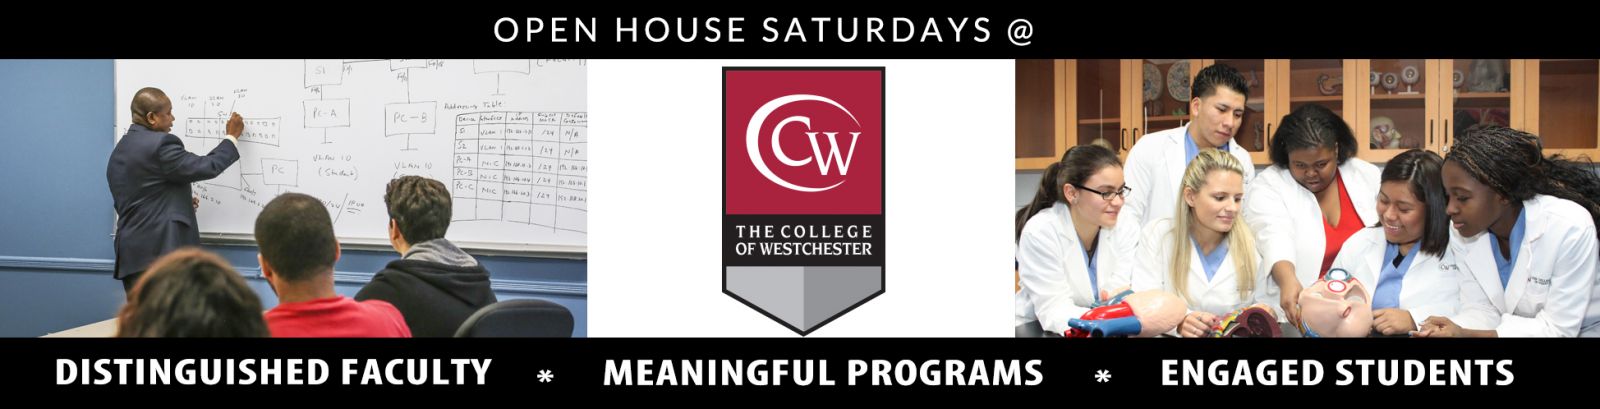 The College of Westchester Open House Saturdays